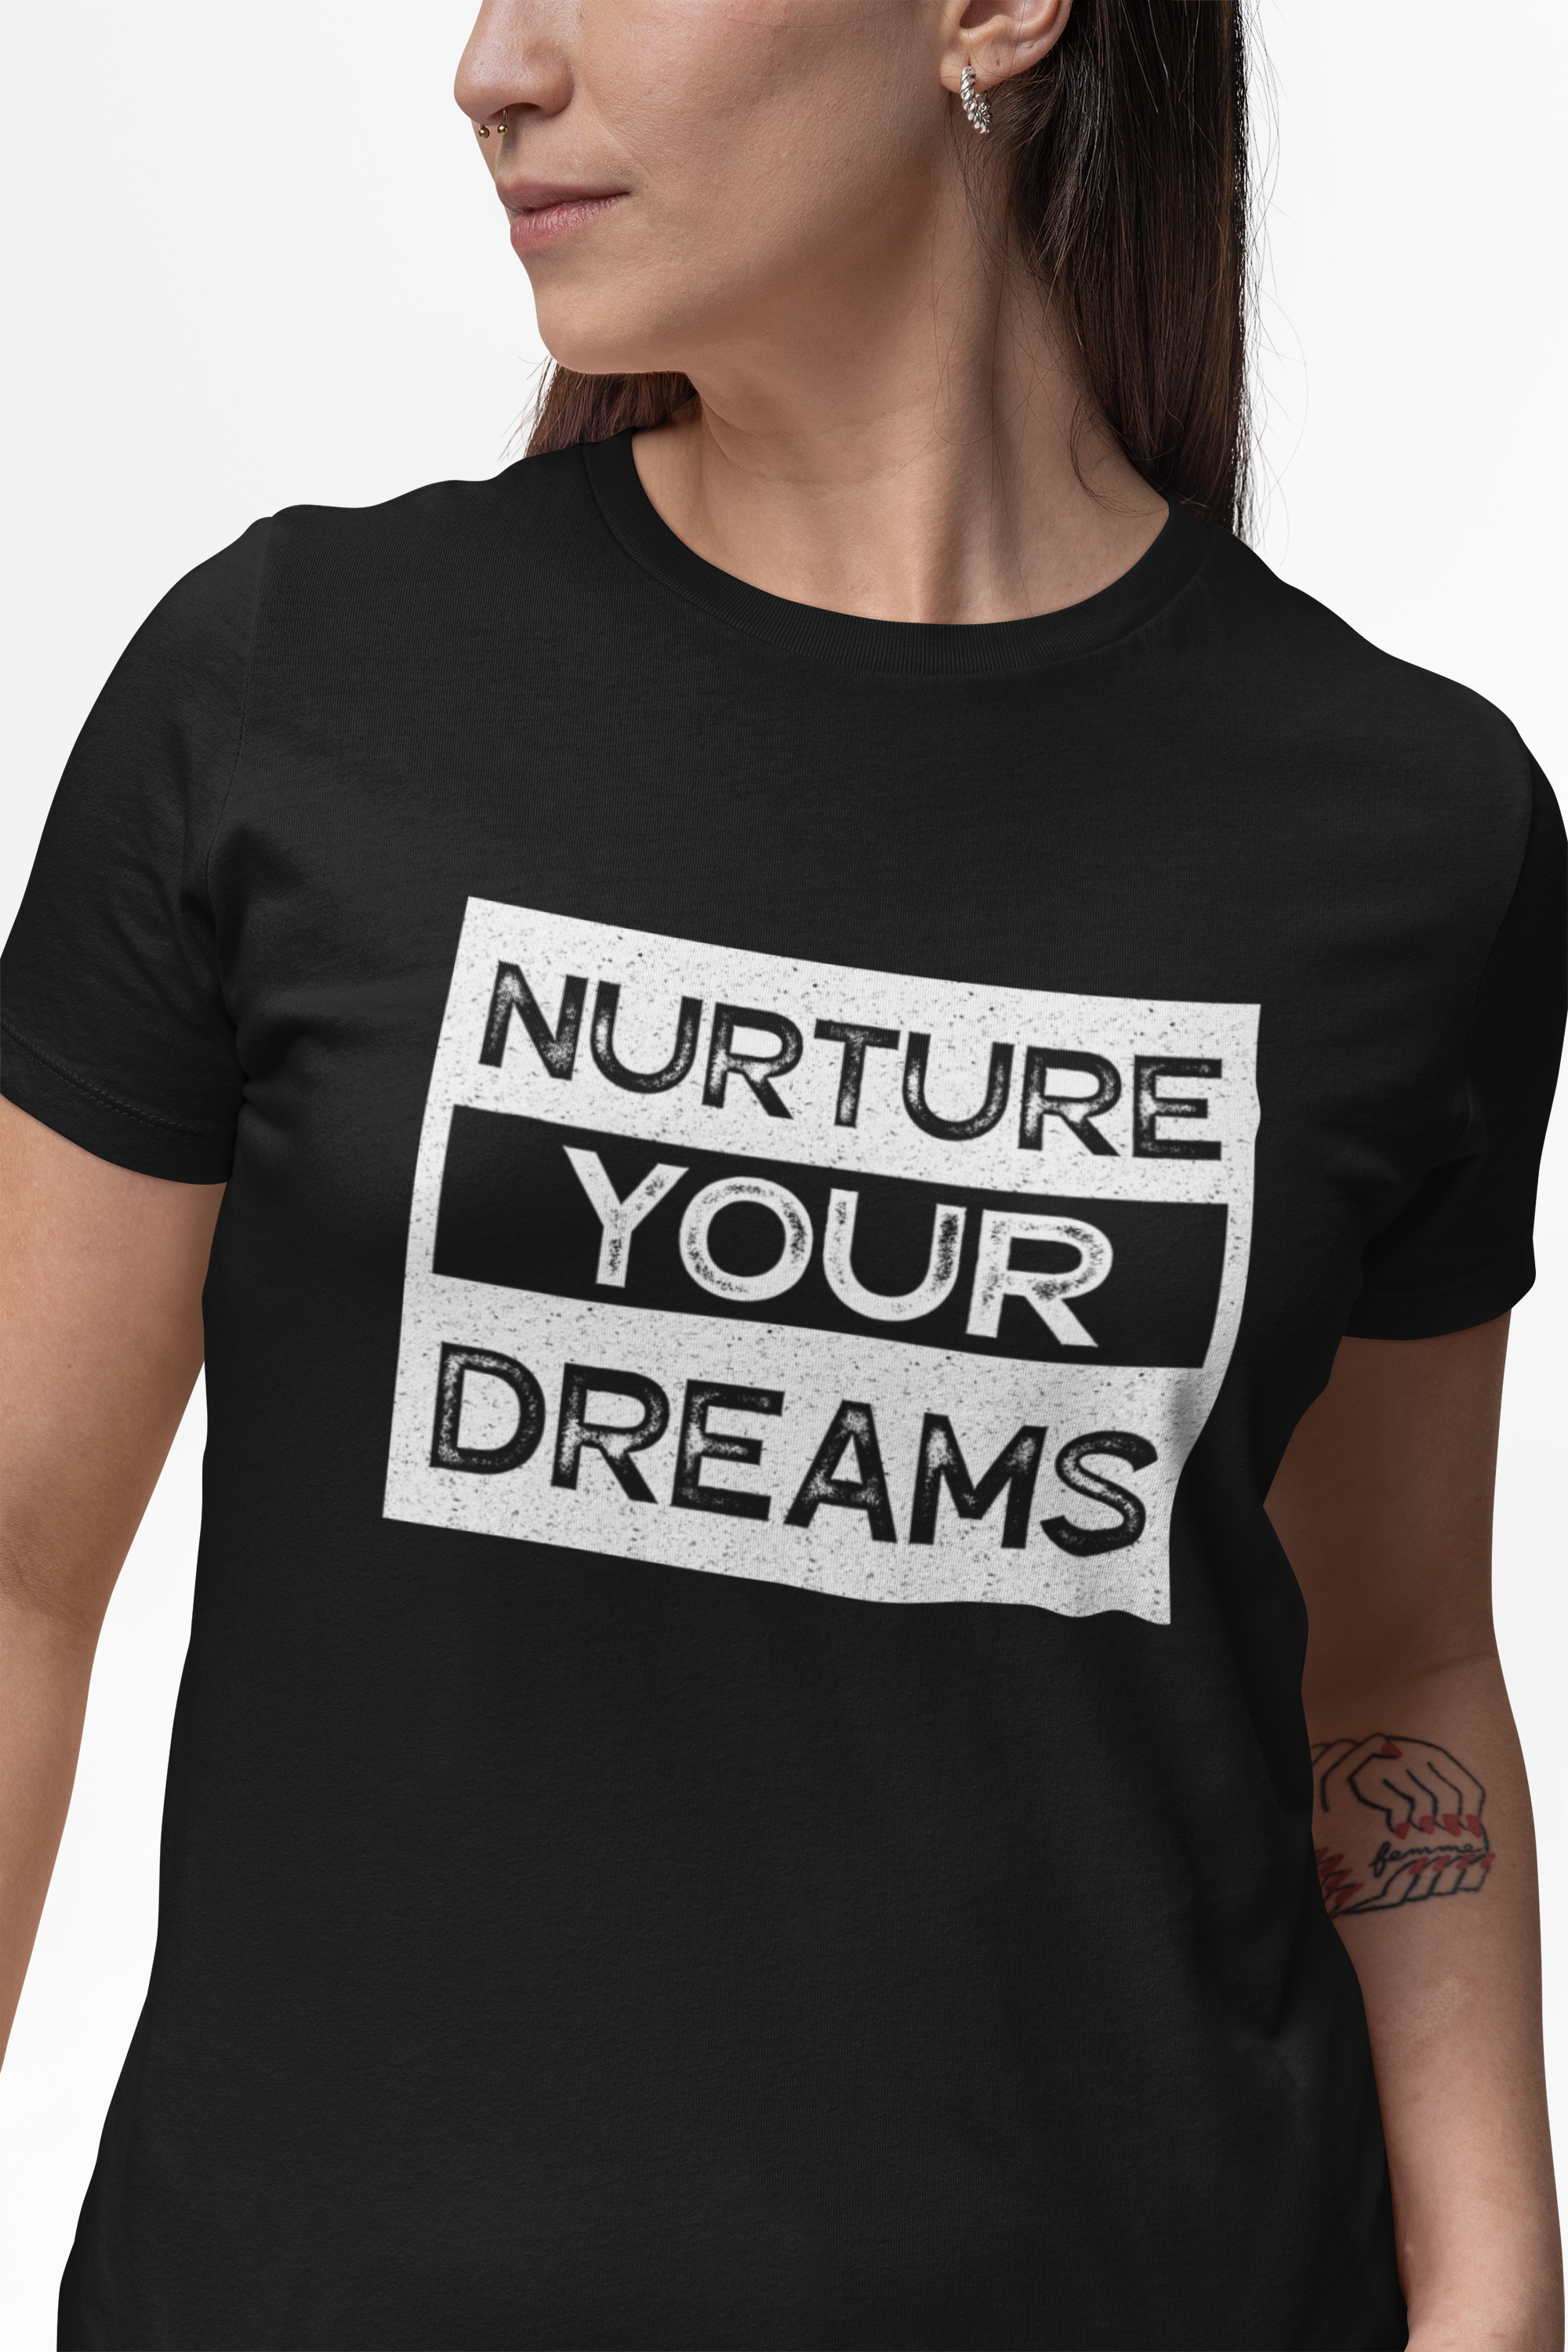 Nurture-Your-Dreams-T-shirt-Selflove-Nurturing-closeup-mockup-featuring-a-tattooed-woman-in-a-rounded-neck-bella-canvas-tee-m32786_afe98c60-8f49-4d7d-837f-421e186e6b04.png